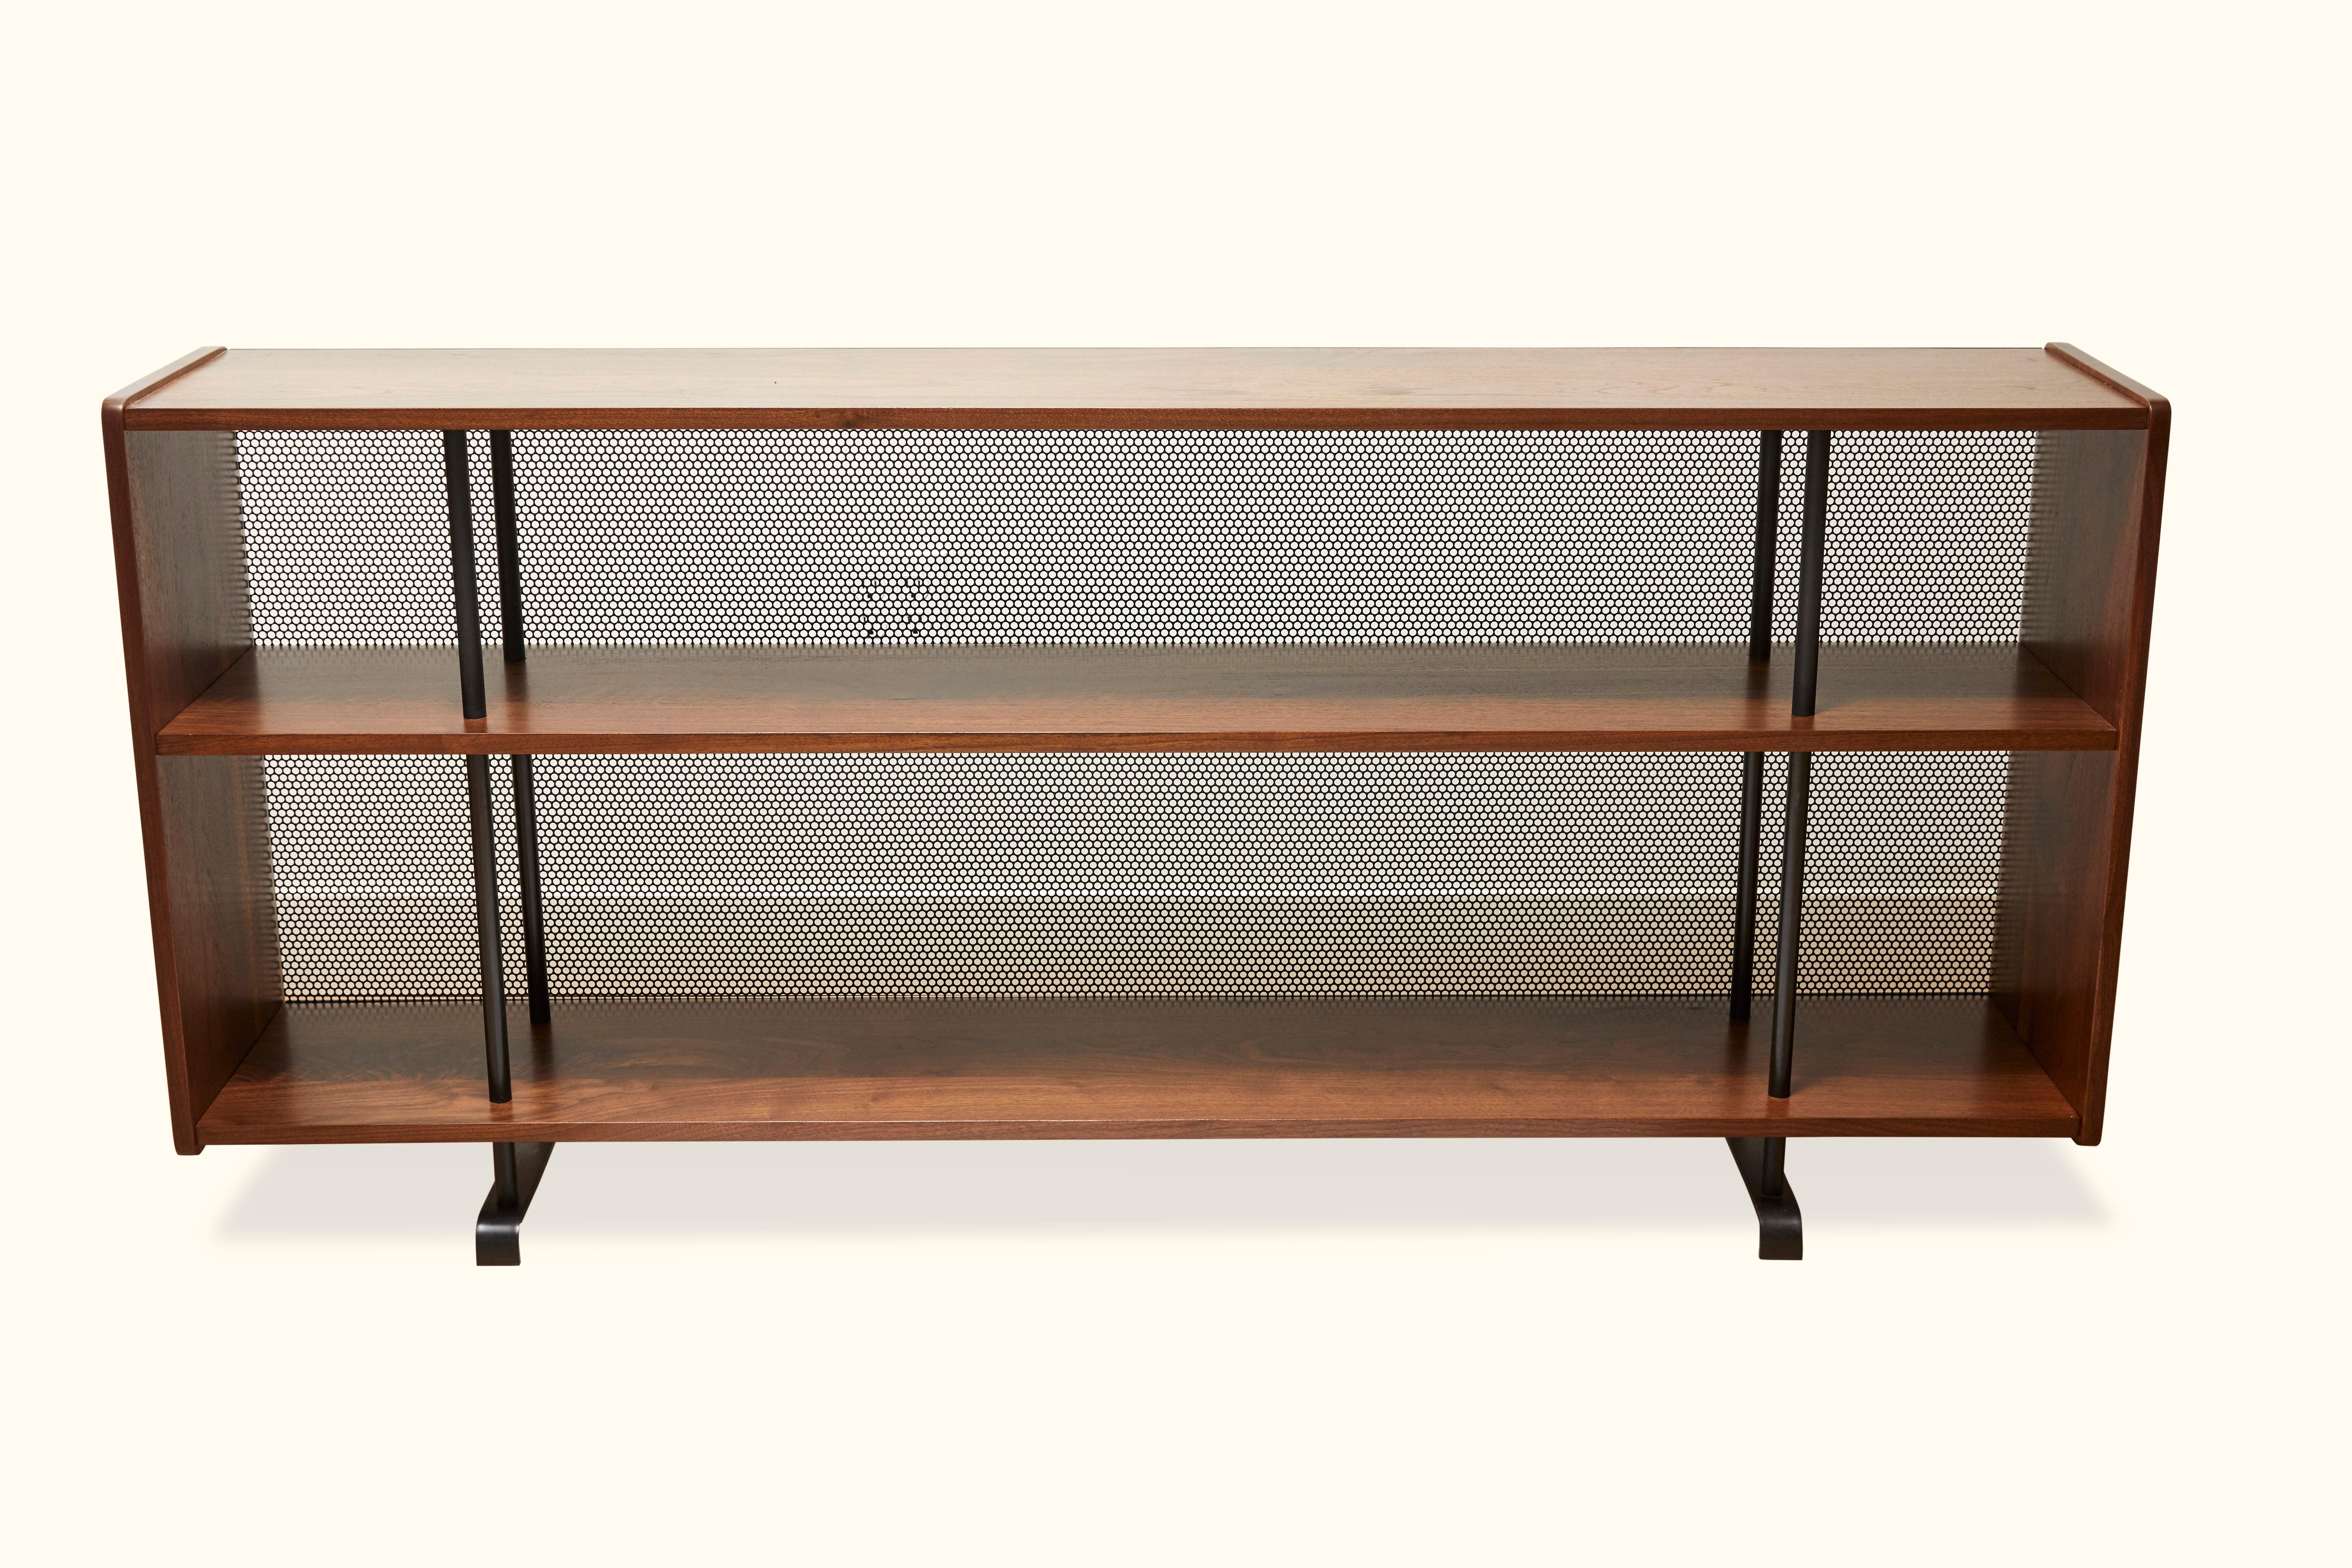 The Maker's Console is made of American walnut or white oak and rests on a blackened steel base. Features two shelves and a perforated steel detail on the back. Shown here in Light Walnut

The Lawson-Fenning Collection is designed and handmade in